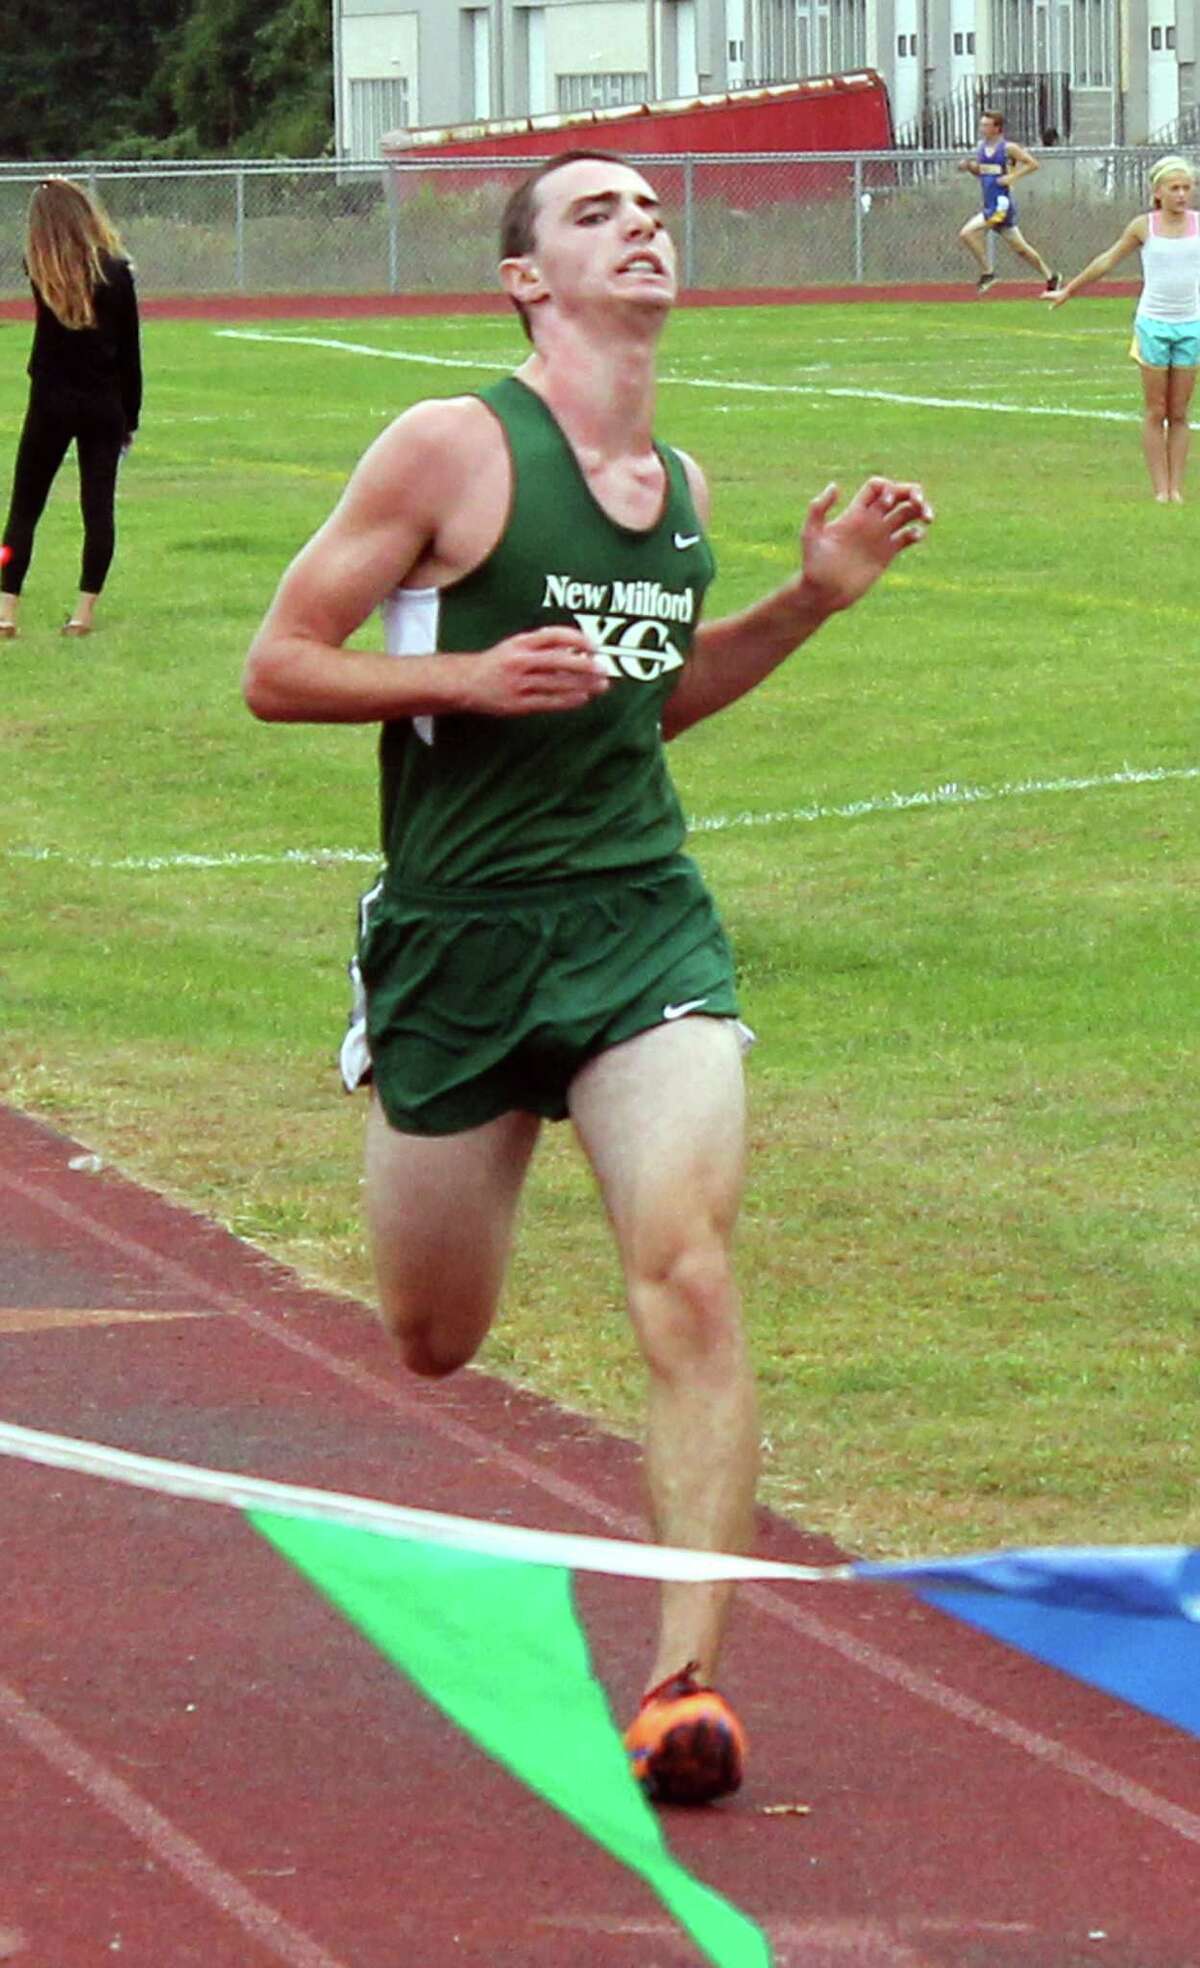 Charlie Osborne was the fourth New Milford runner across the line and finished sixth overall in the meet with Newtown and Notre Dame. Oct. 2015